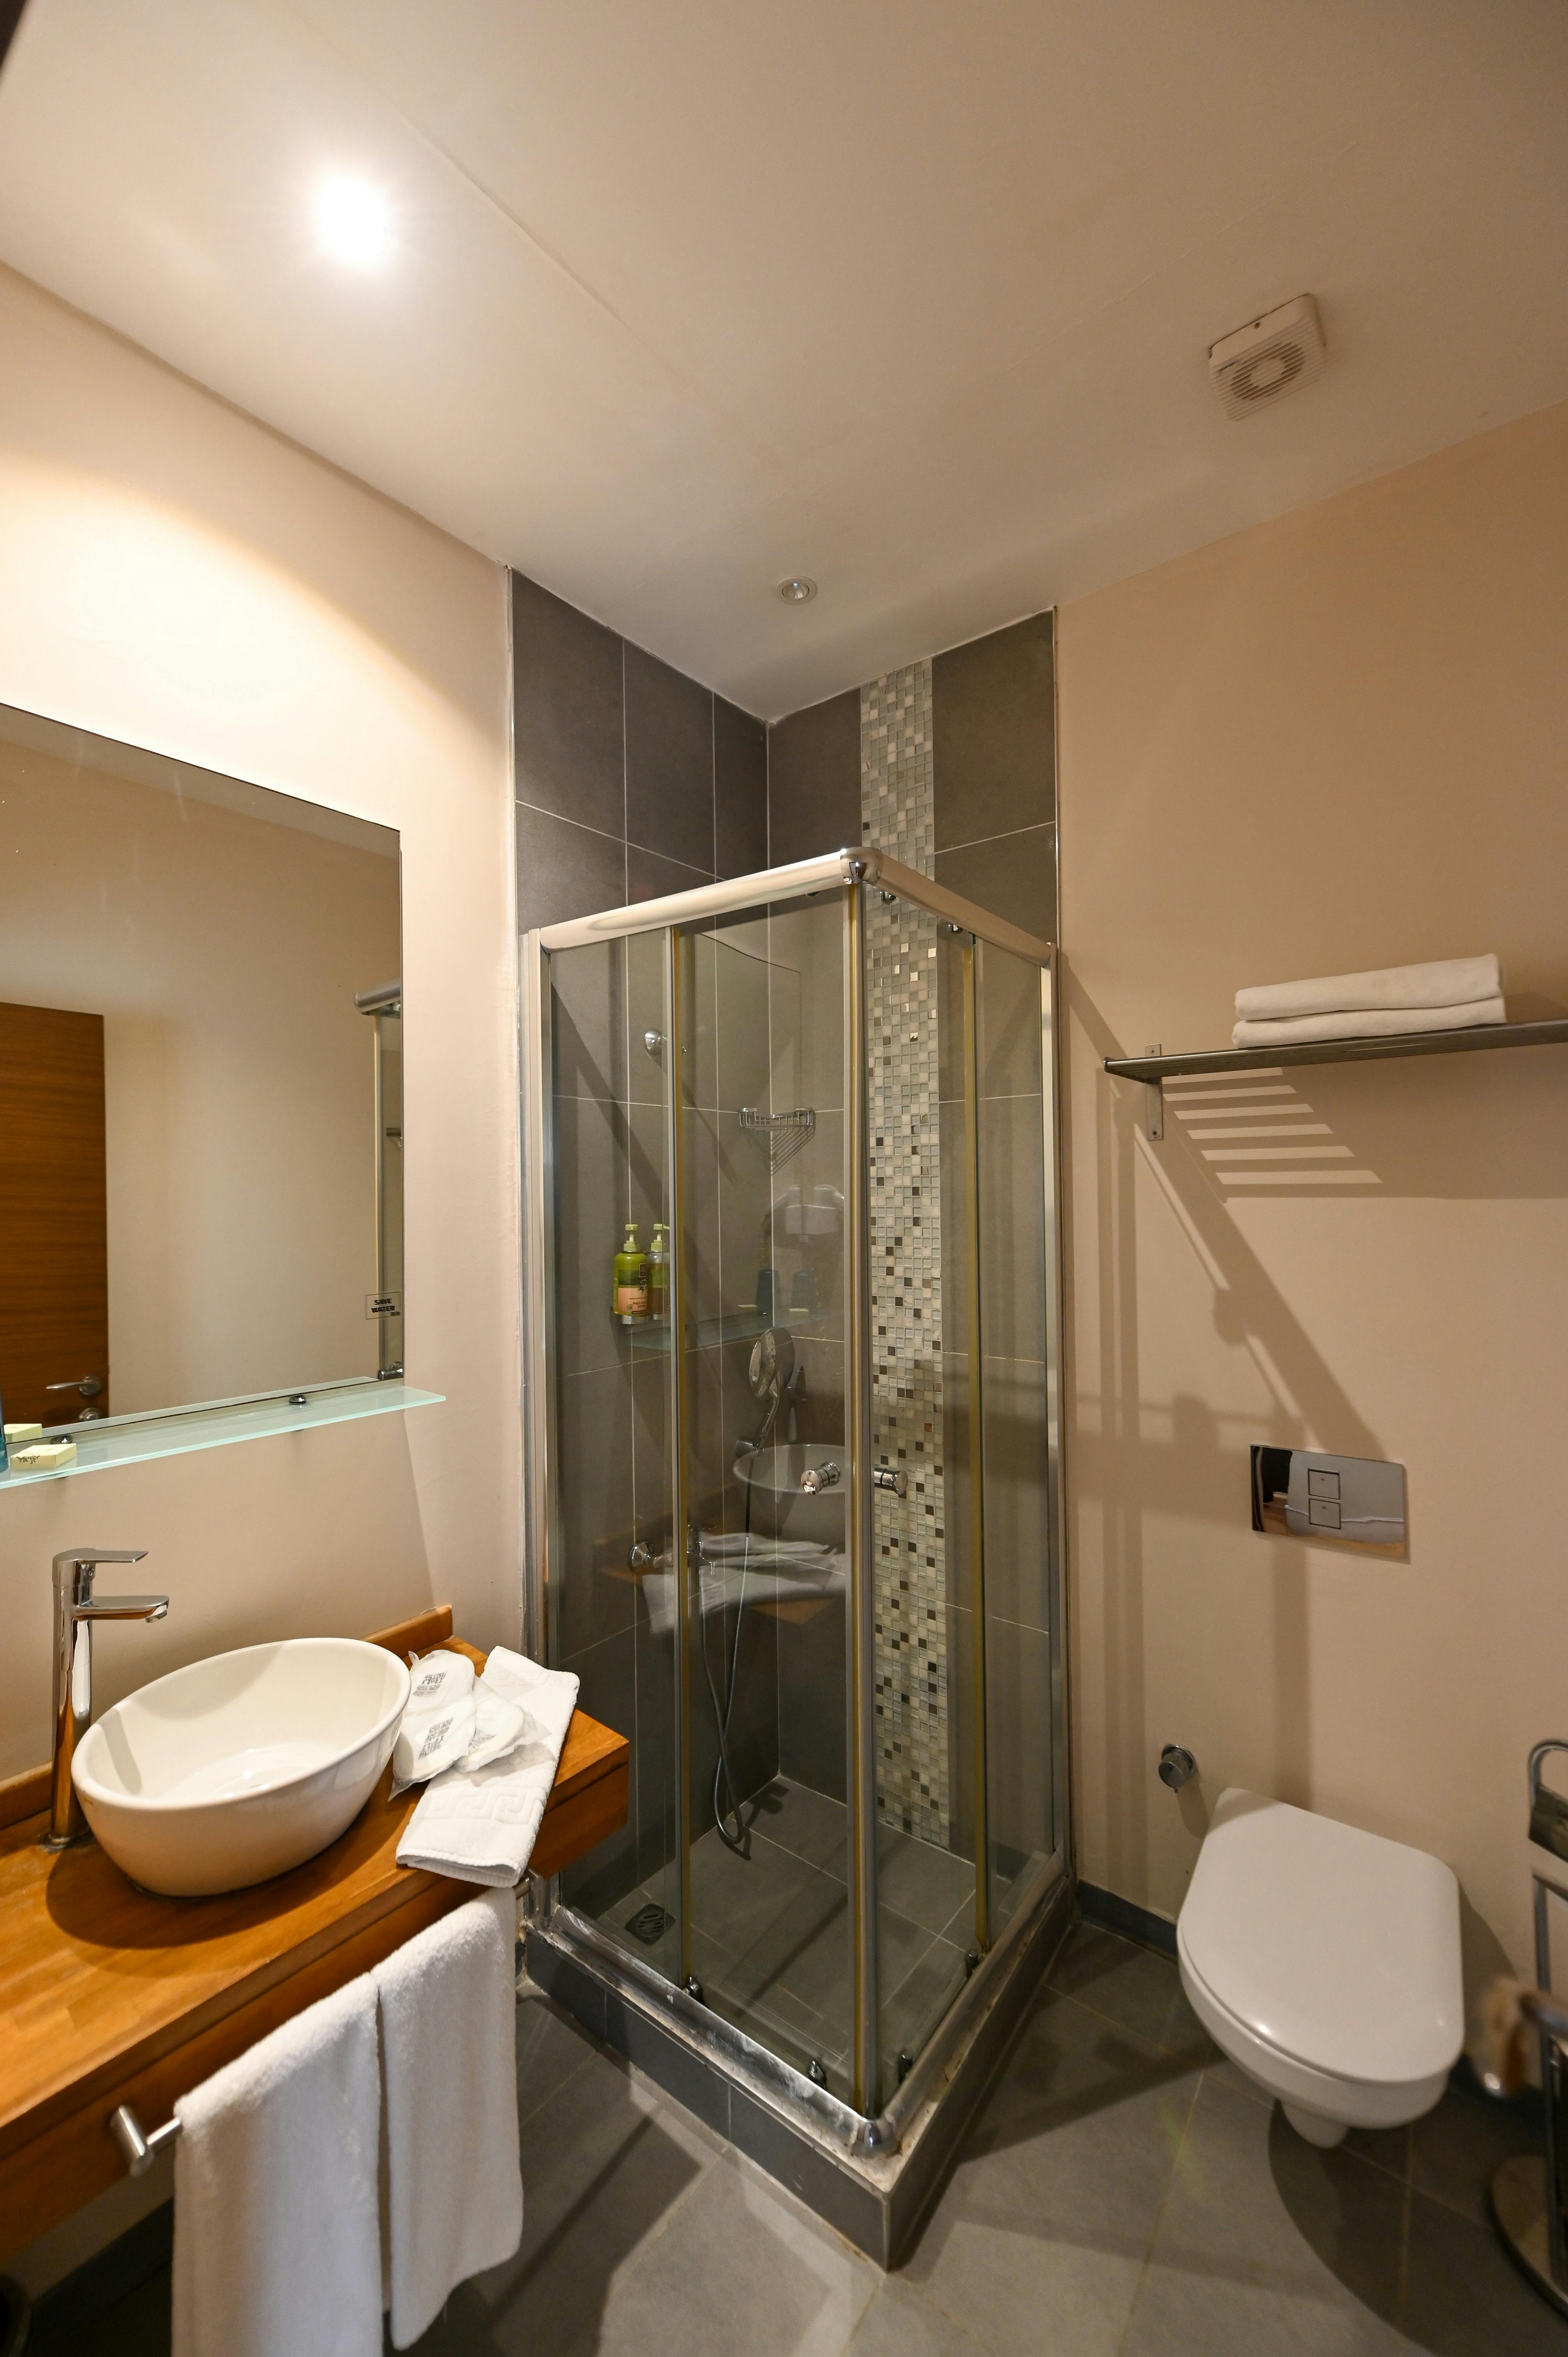 No11 Hotel, bathroom of suite with kitchenette